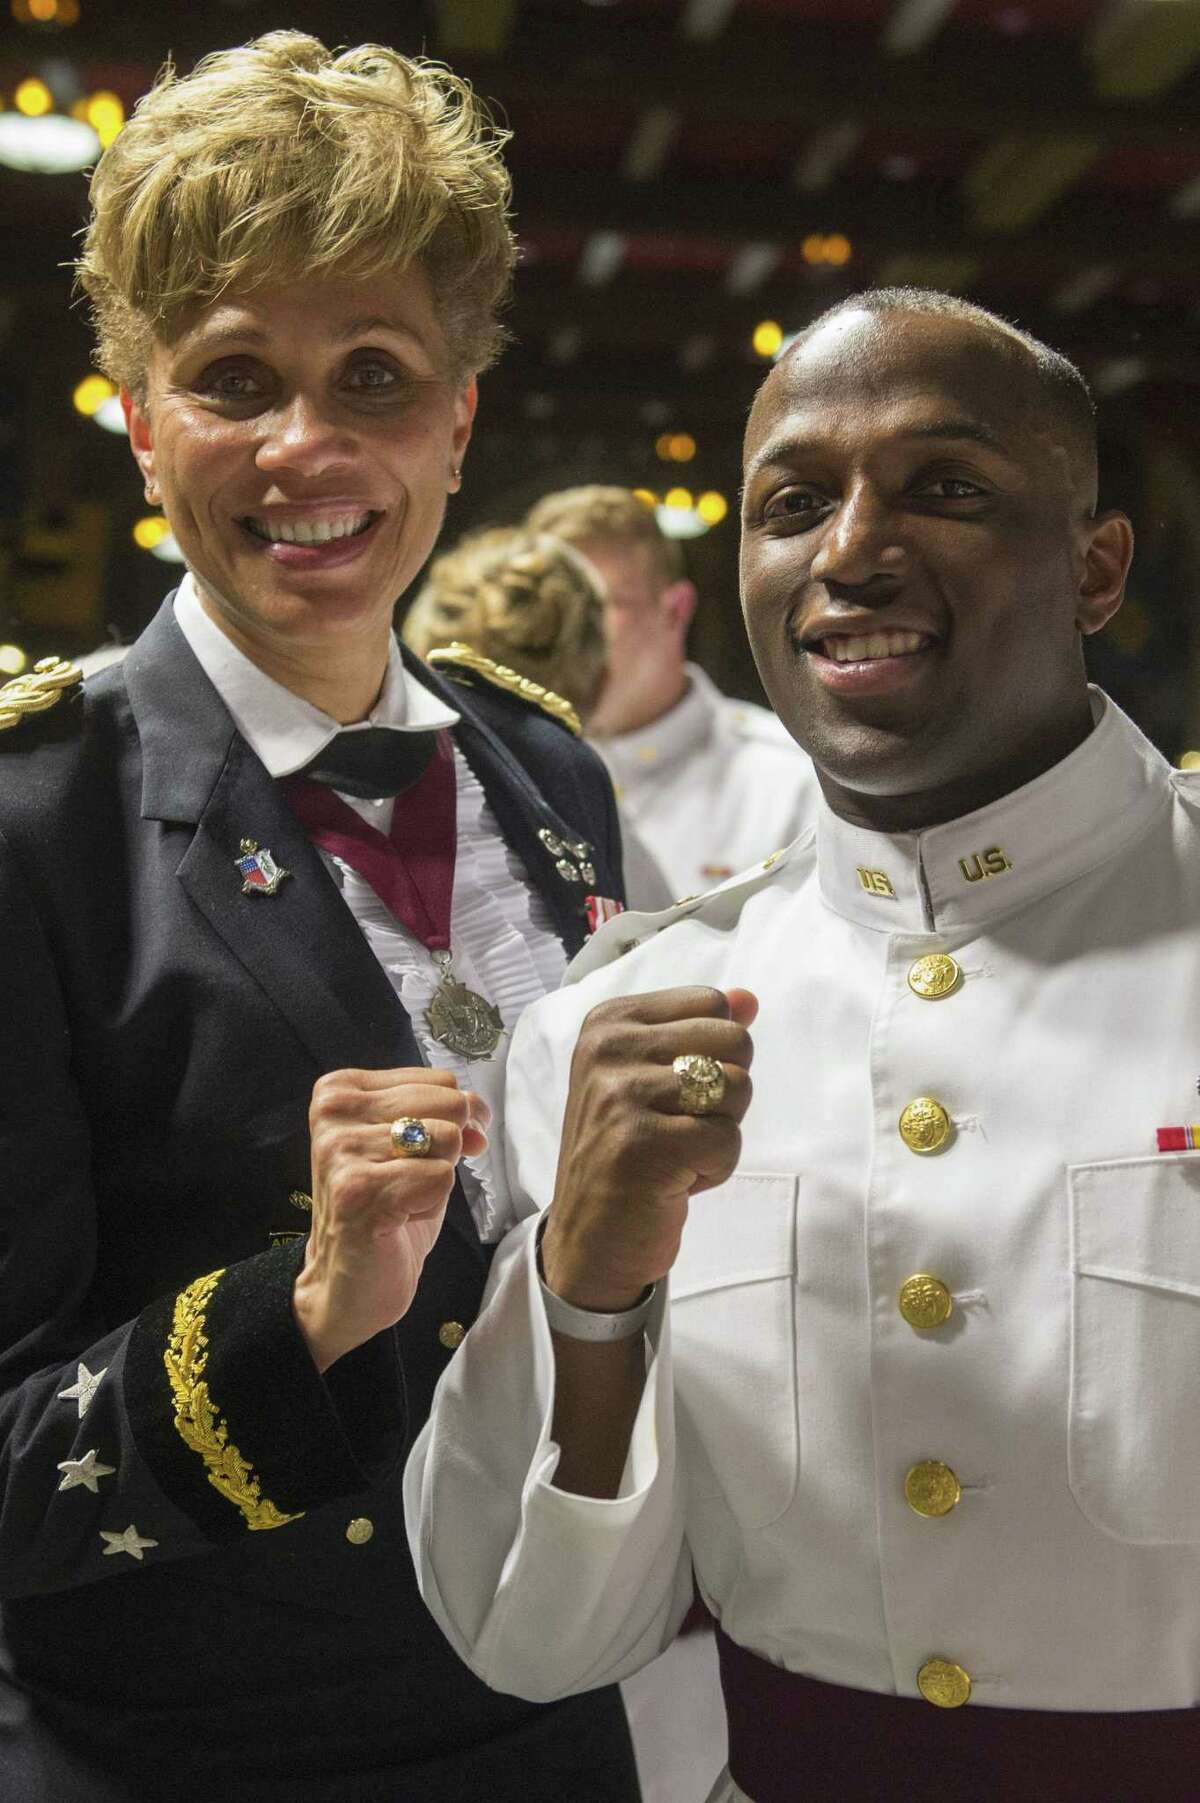 Tony Smith of Katy graduated May 25 from the U.S. Military Academy at West Point in what officials are calling their “most diverse class ever.” Vice President Mike Pence served as the commencement speaker for the class of 2019 which has more than 980 graduates.